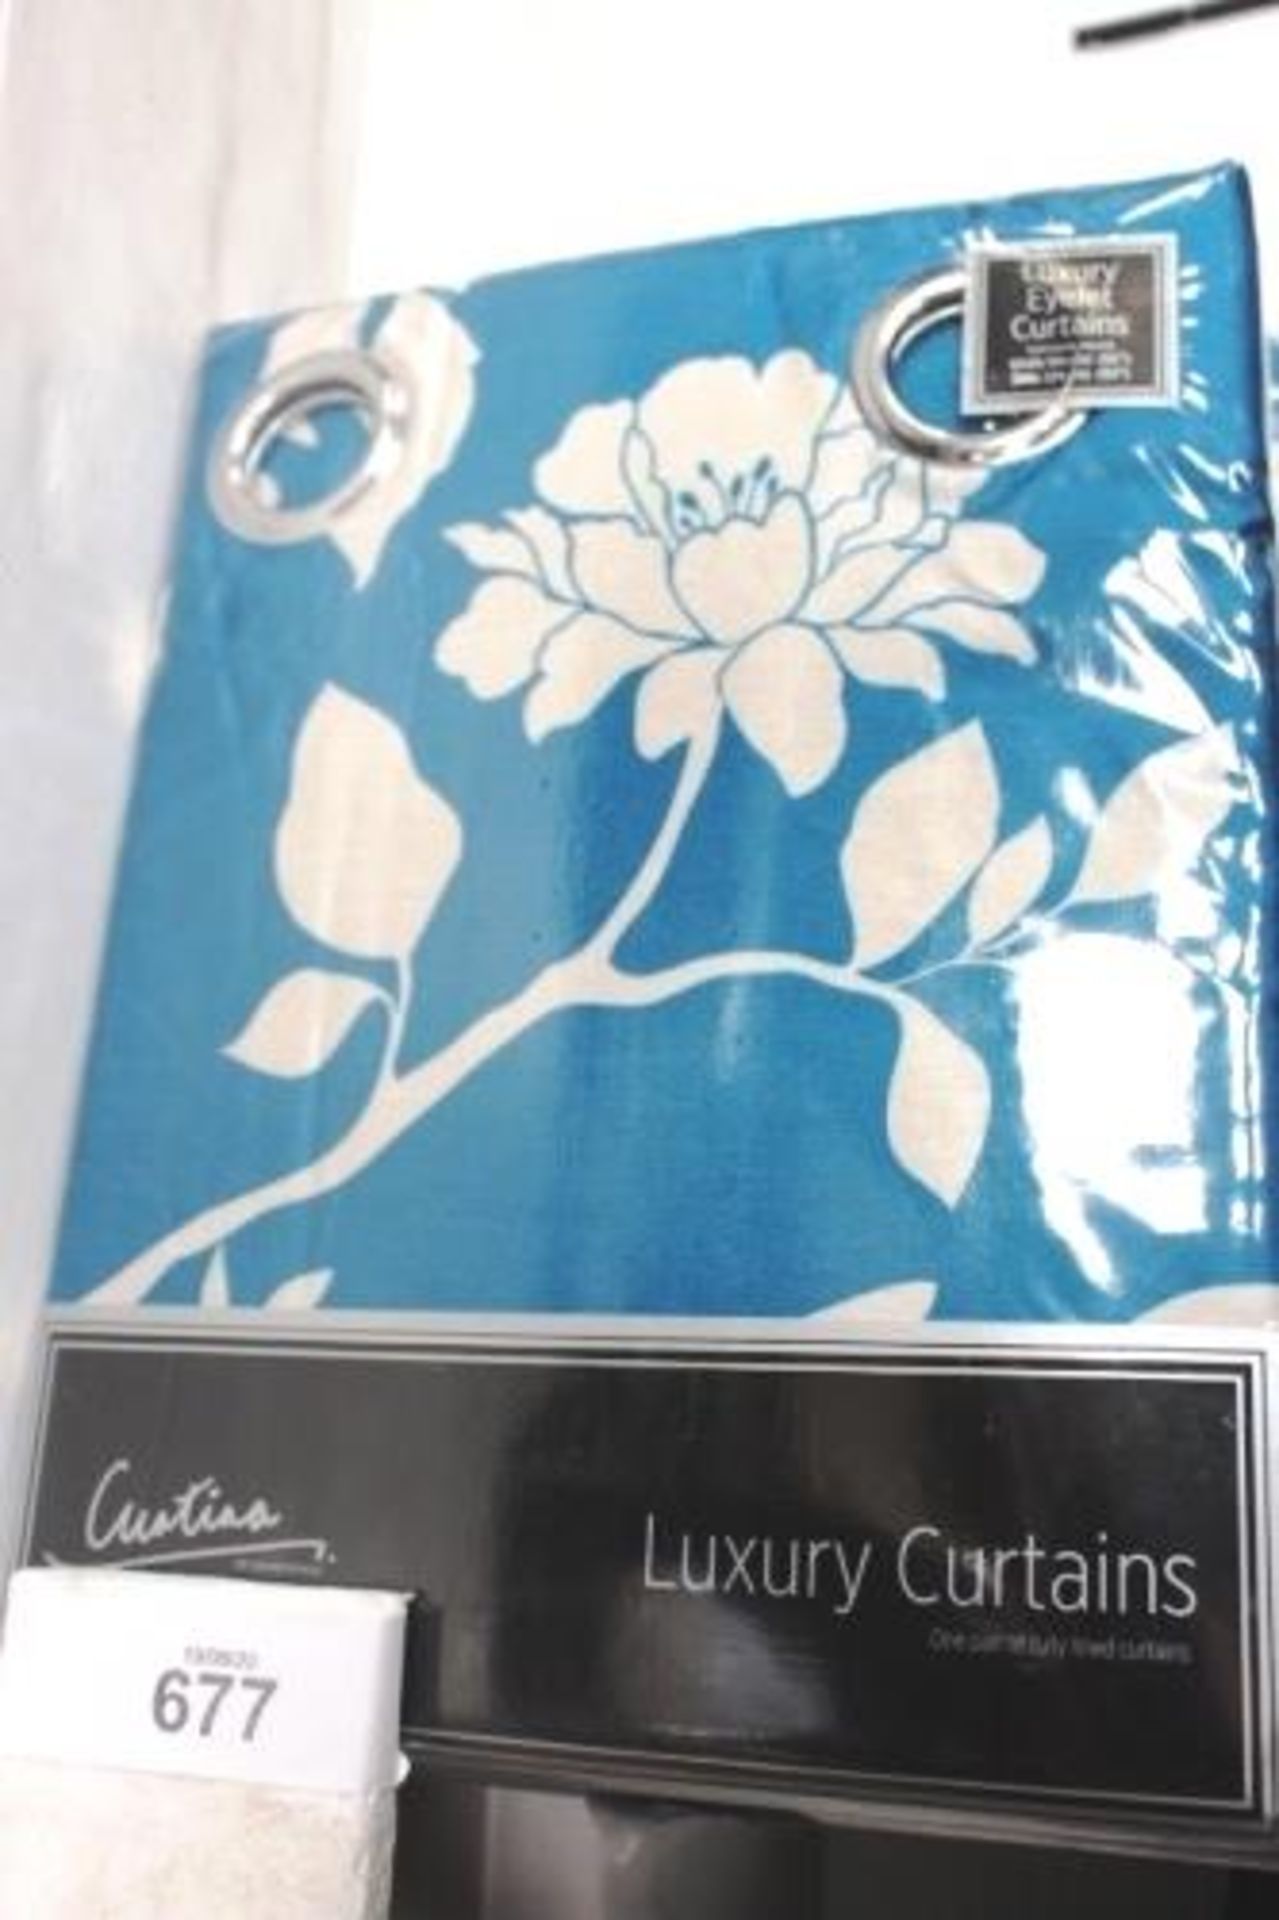 6 x pairs of Rosenthal Curtina teal lined eyelet silhouette floral curtains, size 168 x 229cm - - Image 3 of 3